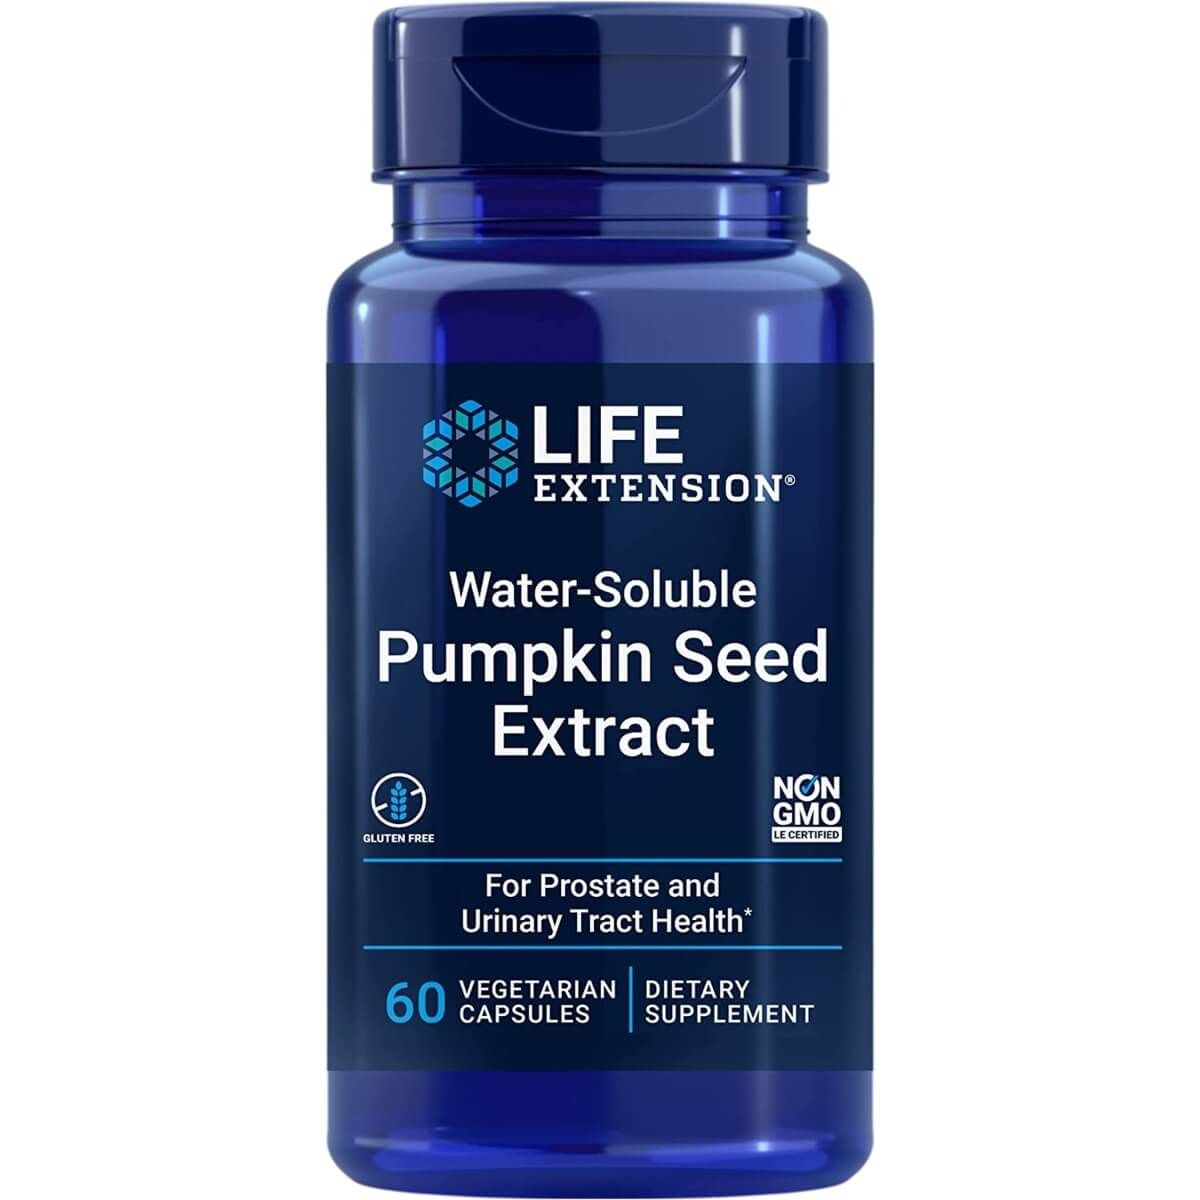 Photos - Vitamins & Minerals Life Extension Water-Soluble Pumpkin Seed Extract 60 Vegetarian Capsules P 